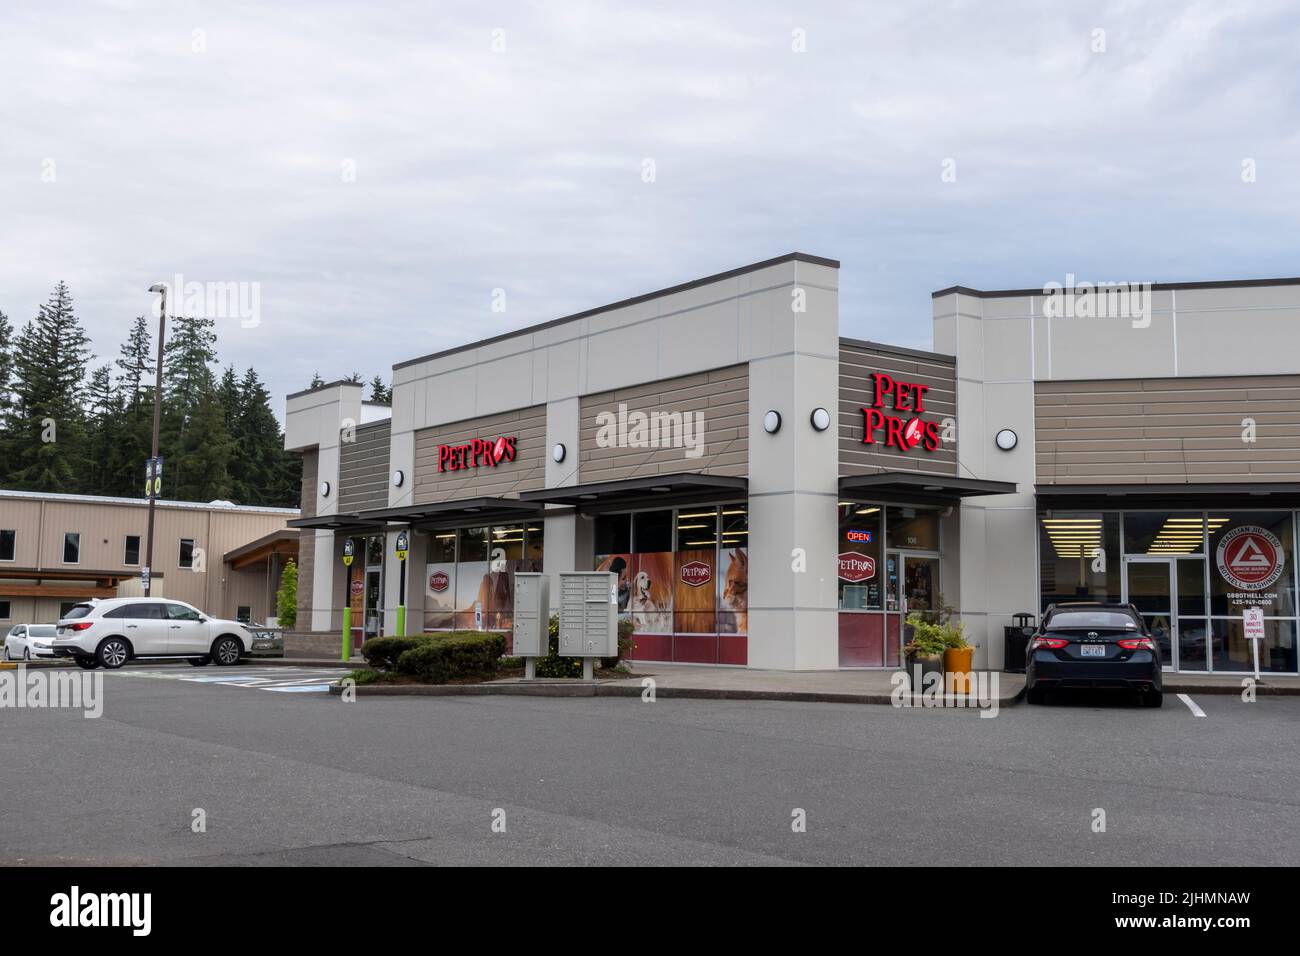 Mill Creek, WA USA - circa June 2022: Exterior view of a Pet Pros store on a cloudy day. Stock Photo